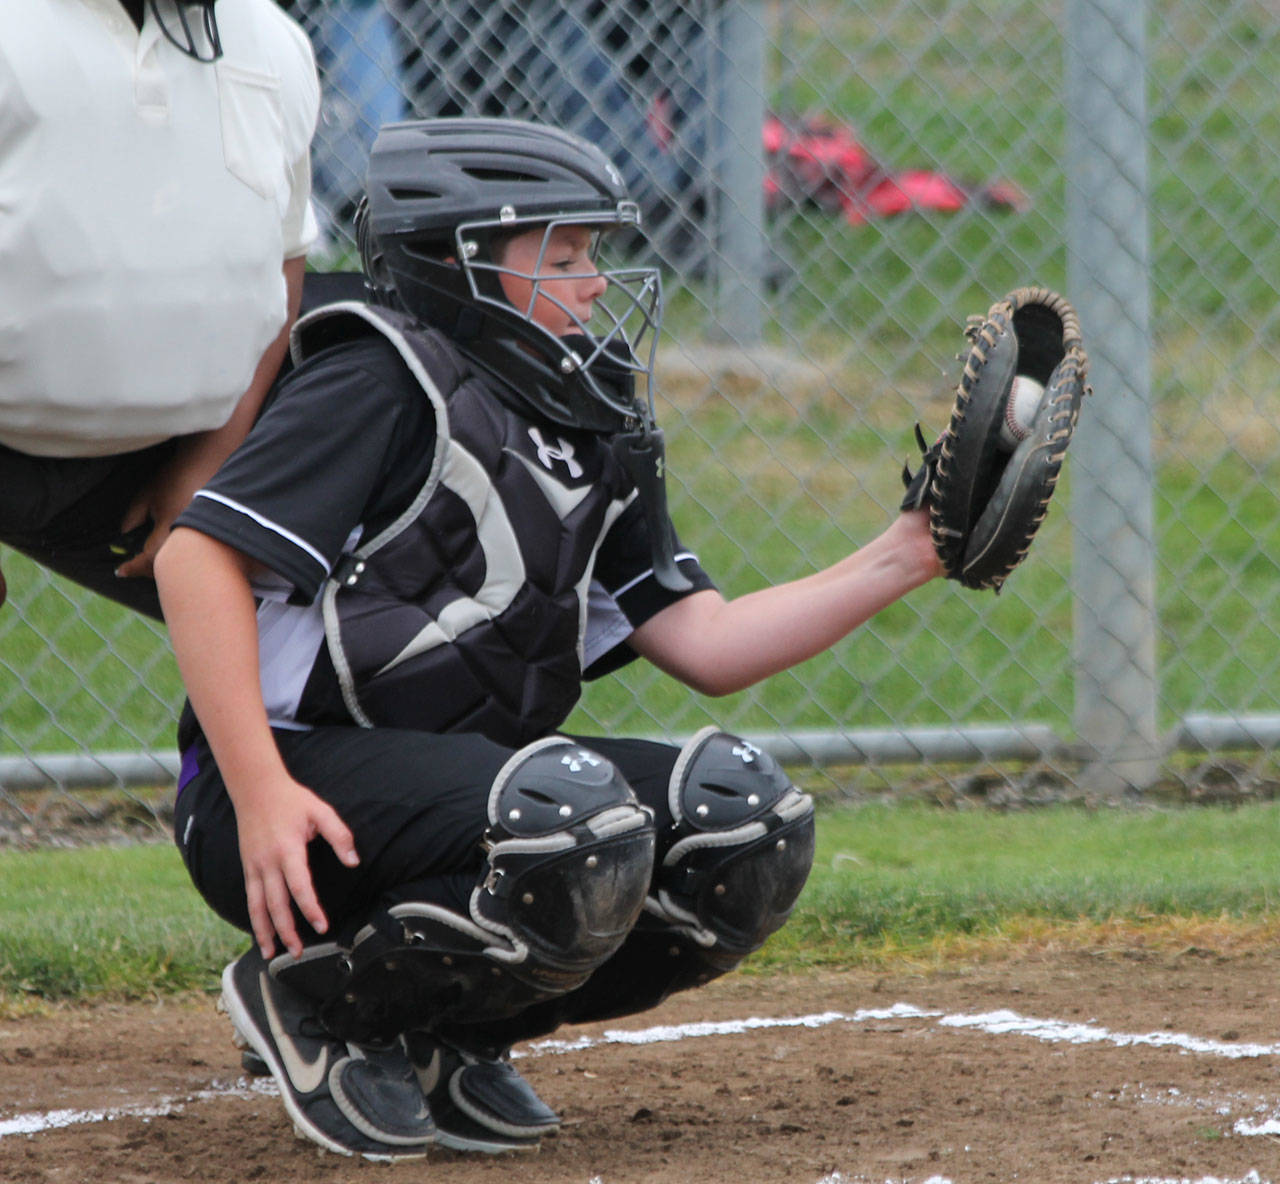 Catcher Meyer Brayden frames a pitch for North Whidbey. (Photo by Jim Waller/Whidbey News-Times)